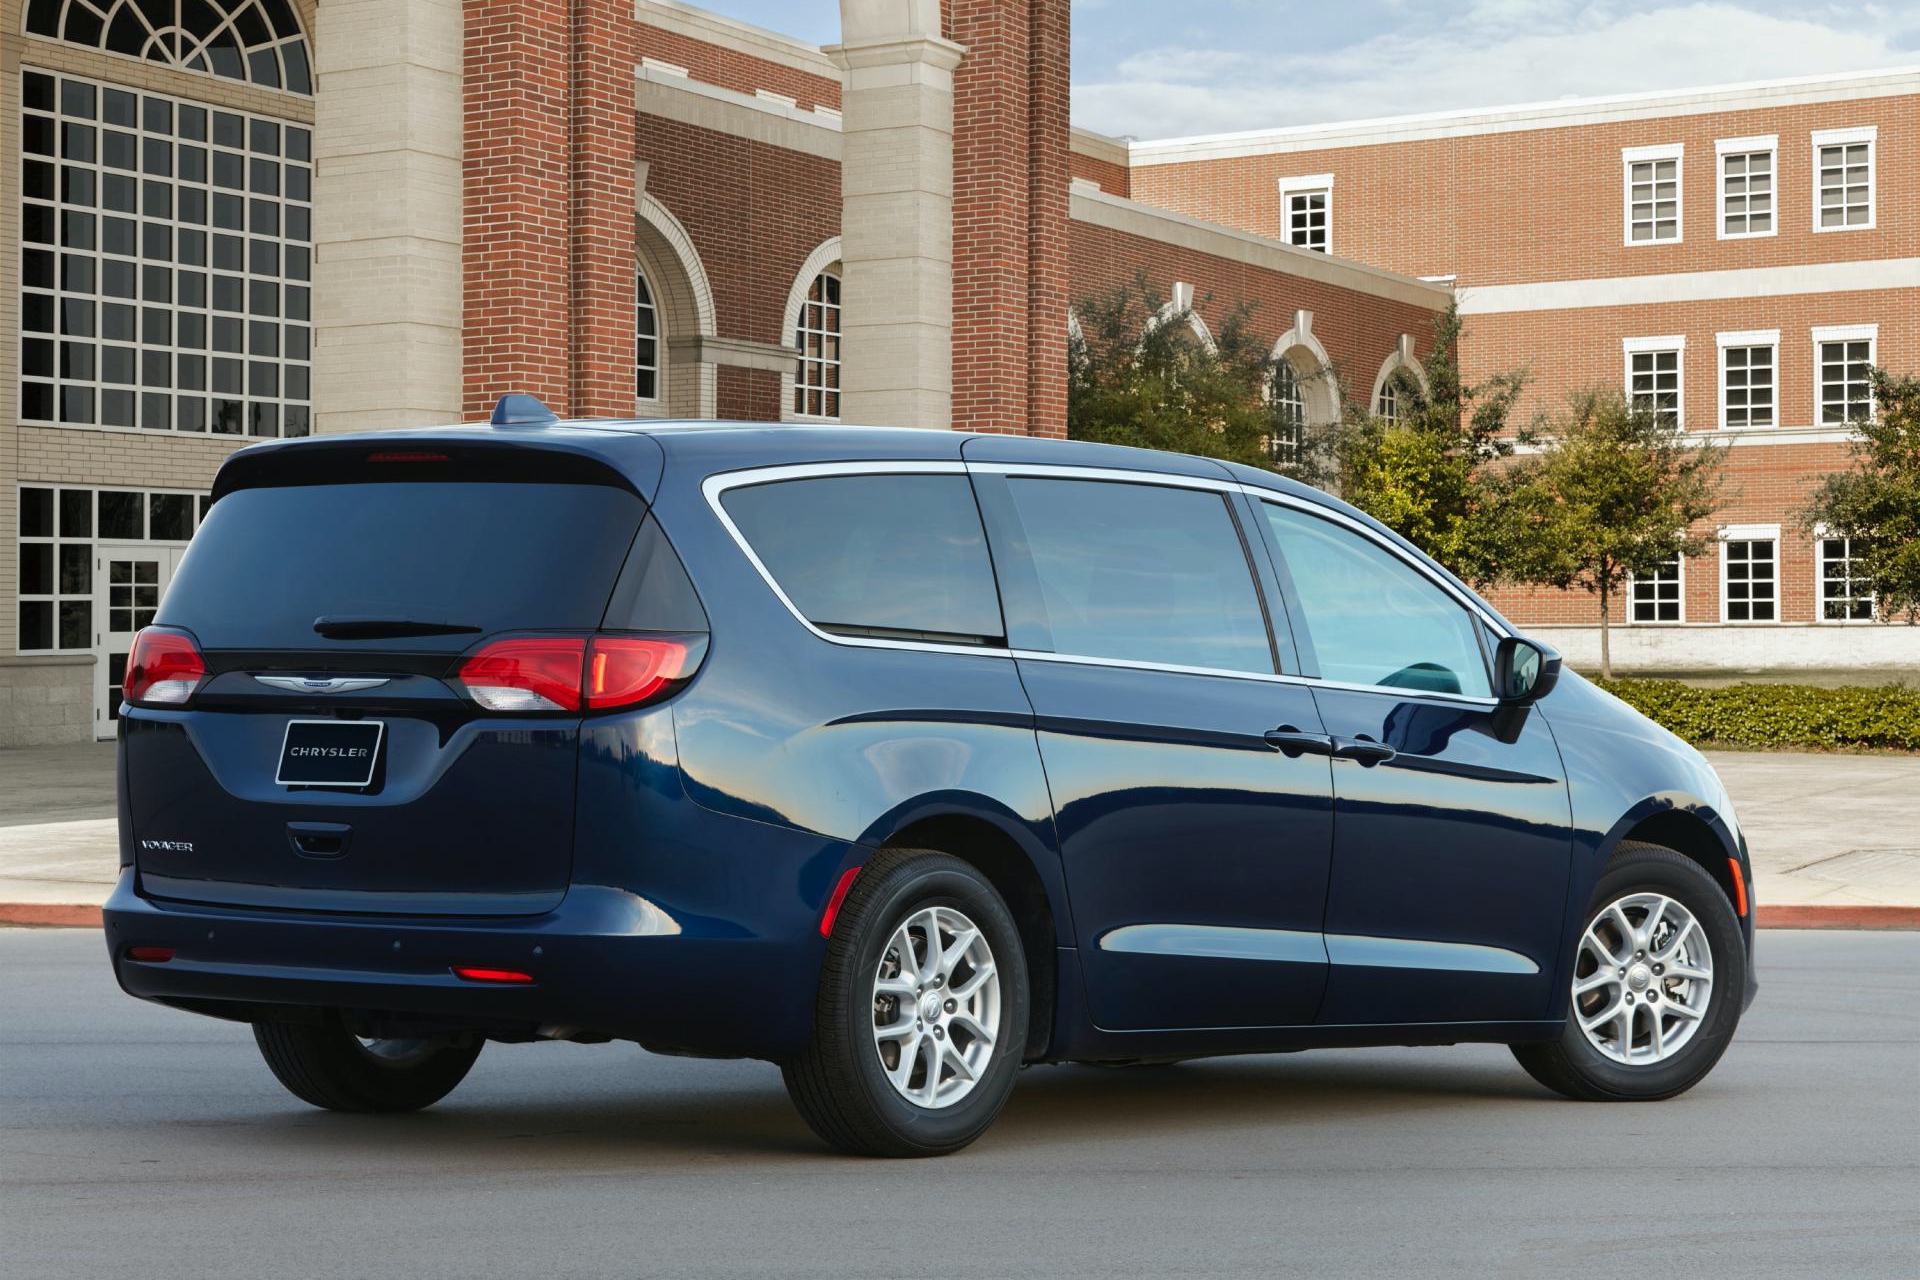 The 2021 Chrysler Voyager Won’t Be Getting The Pacifica’s Facelift